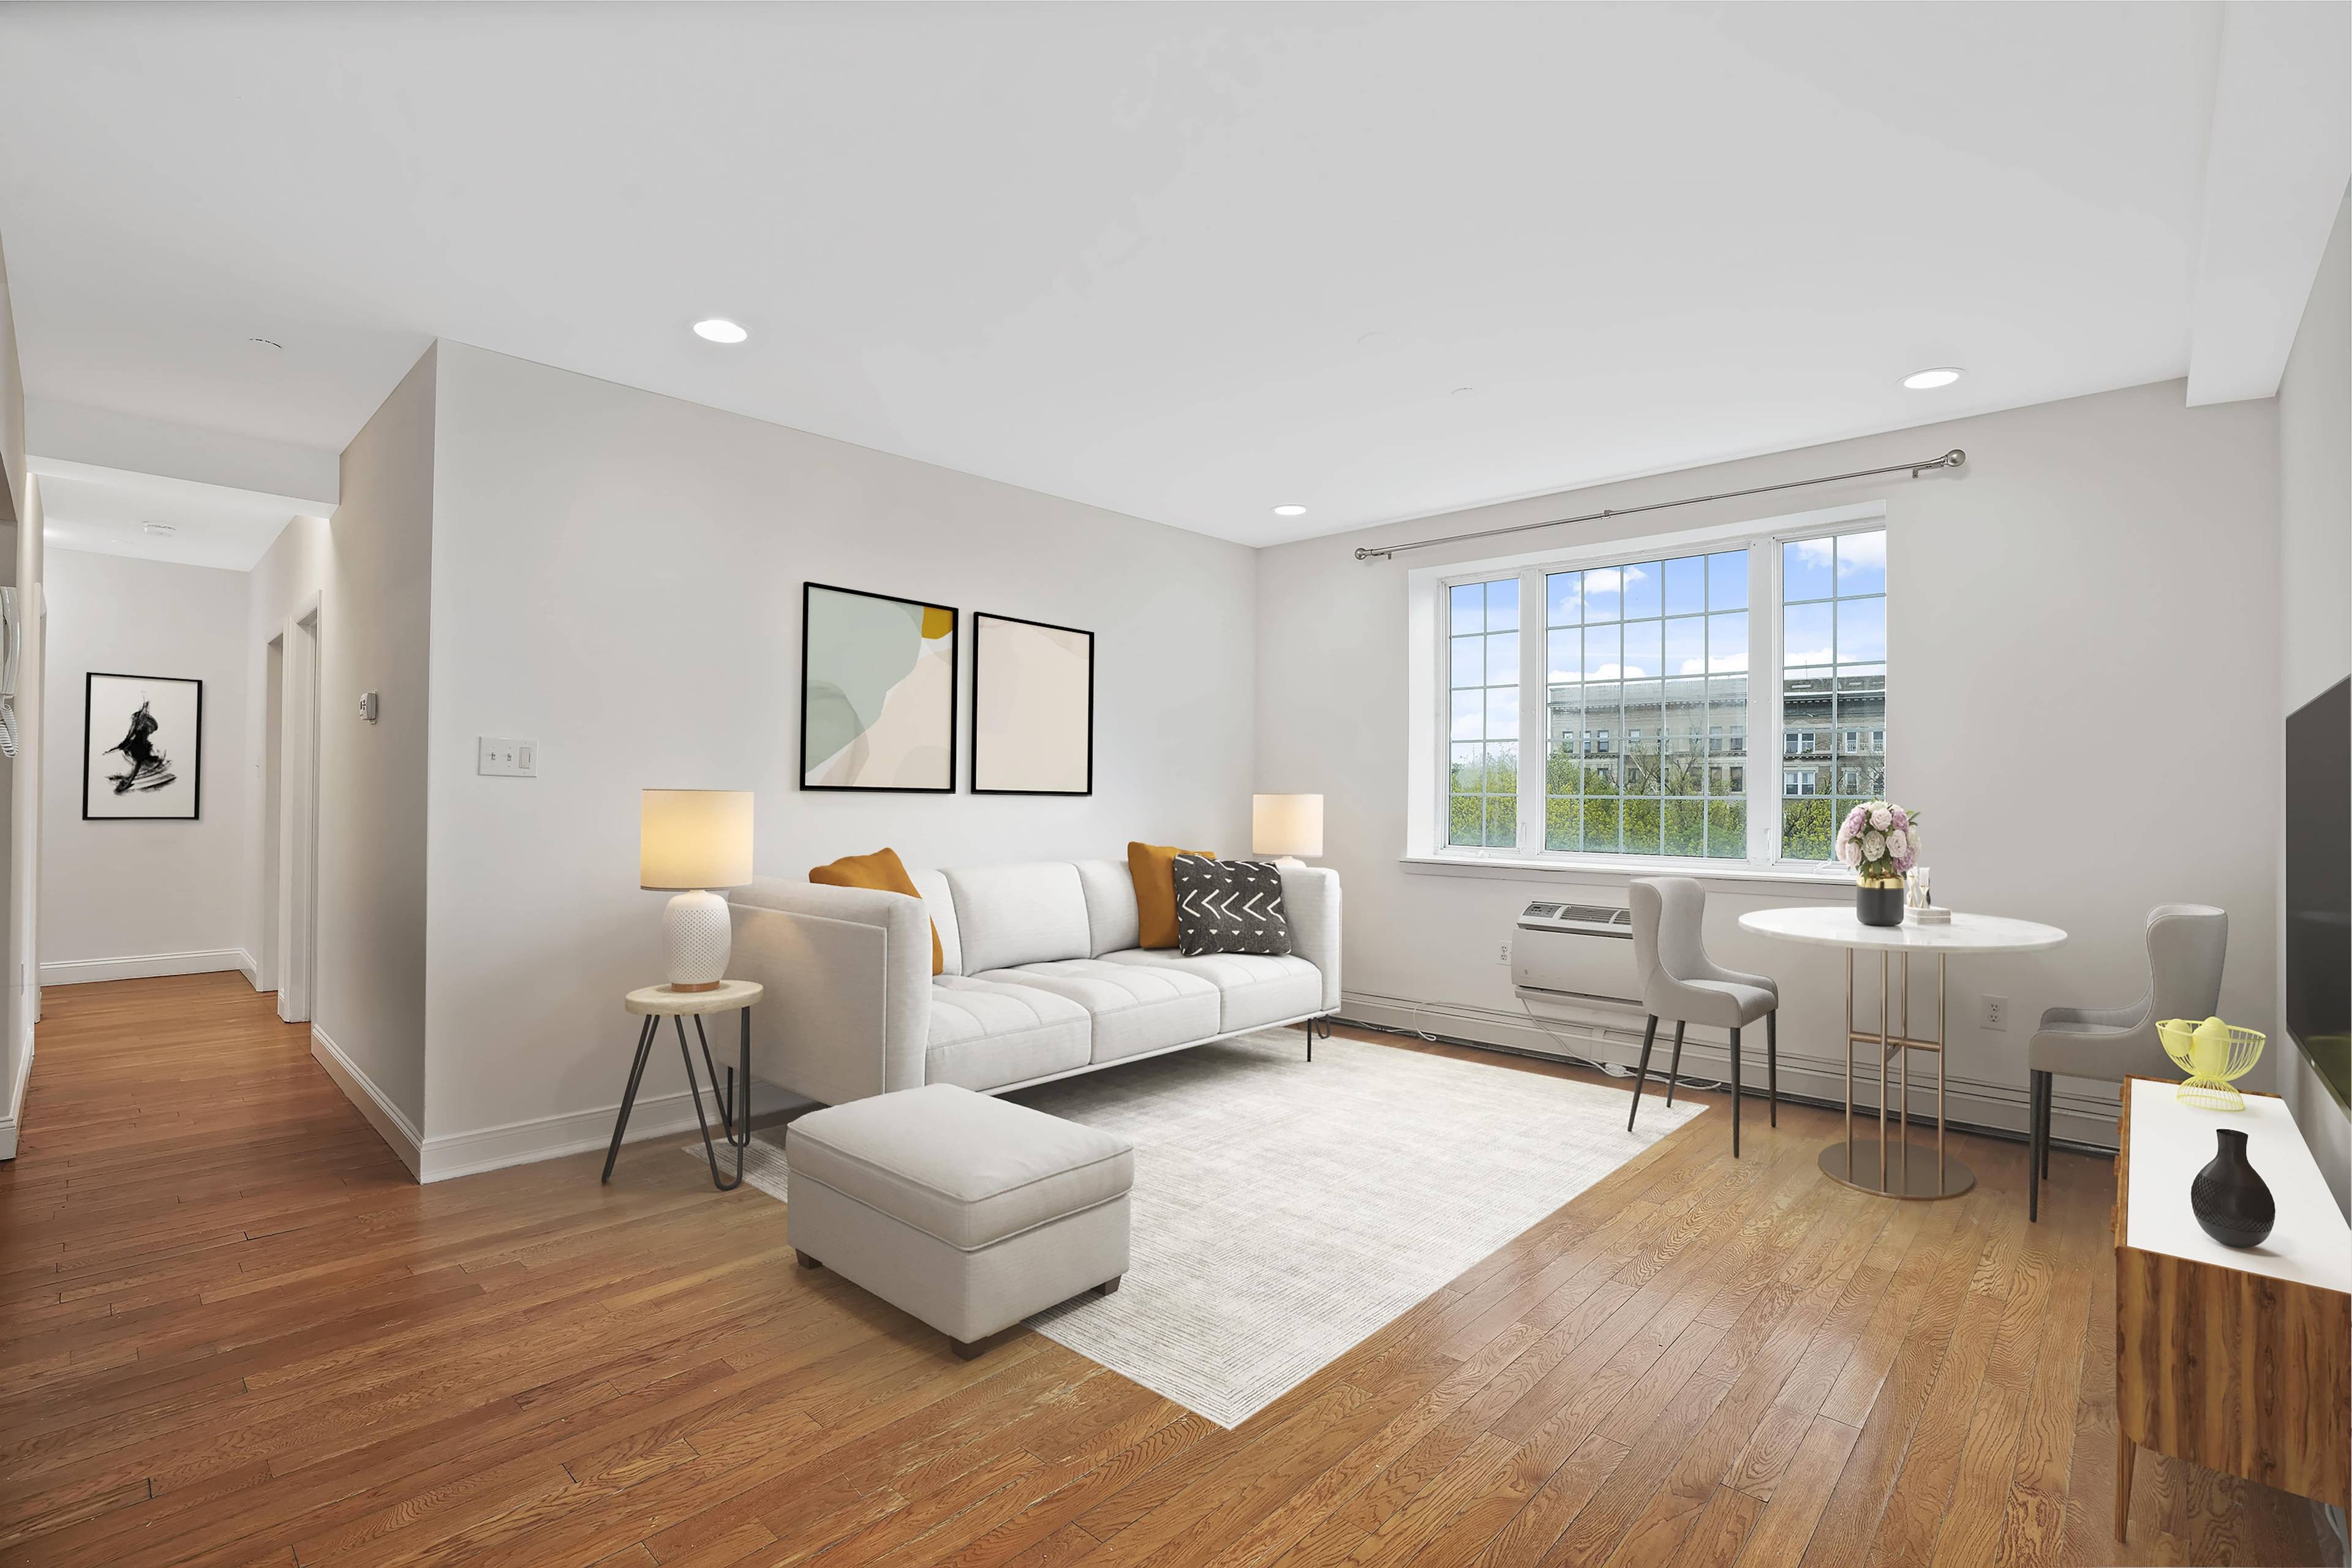 Discover a unique living experience in the Penthouse Duplex Condo at 480 Eastern Parkway, nestled in the vibrant Crown Heights neighborhood.